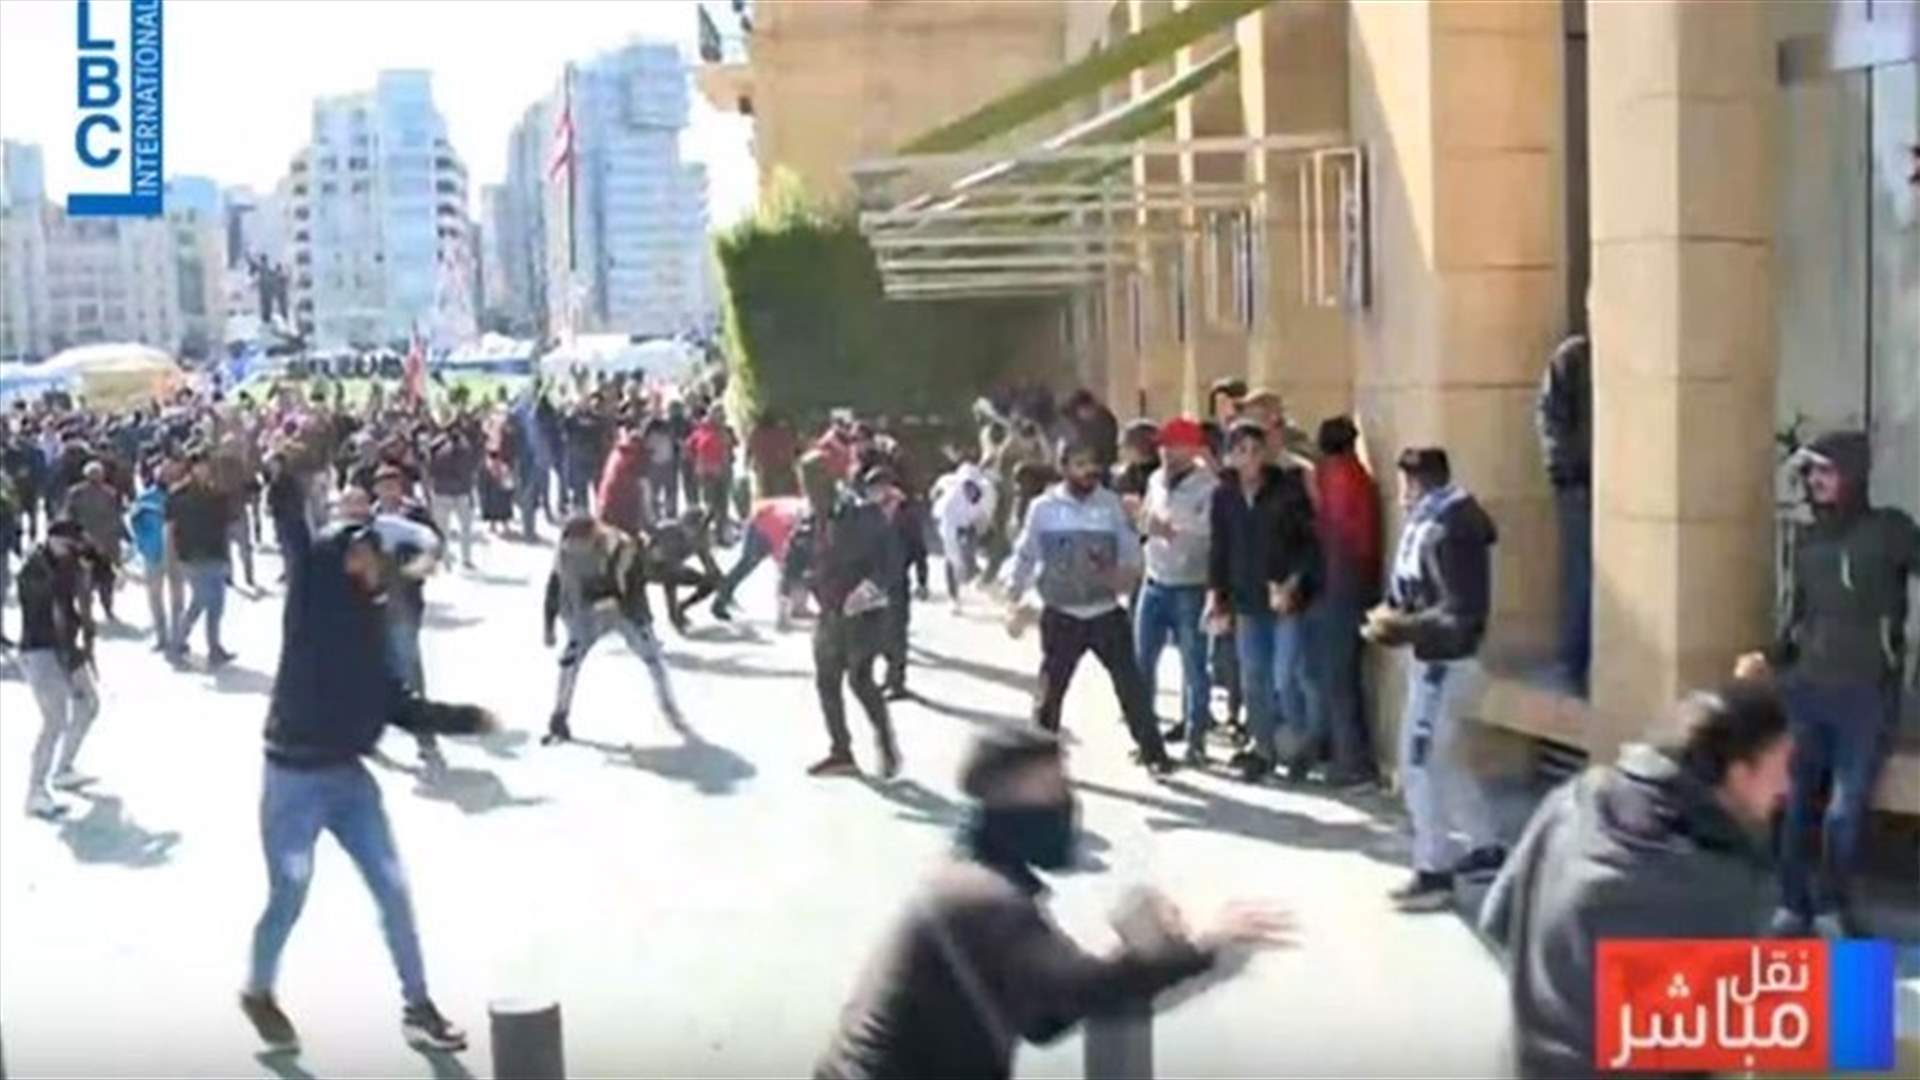 Protesters throw rocks at police near parliament-[VIDEO]